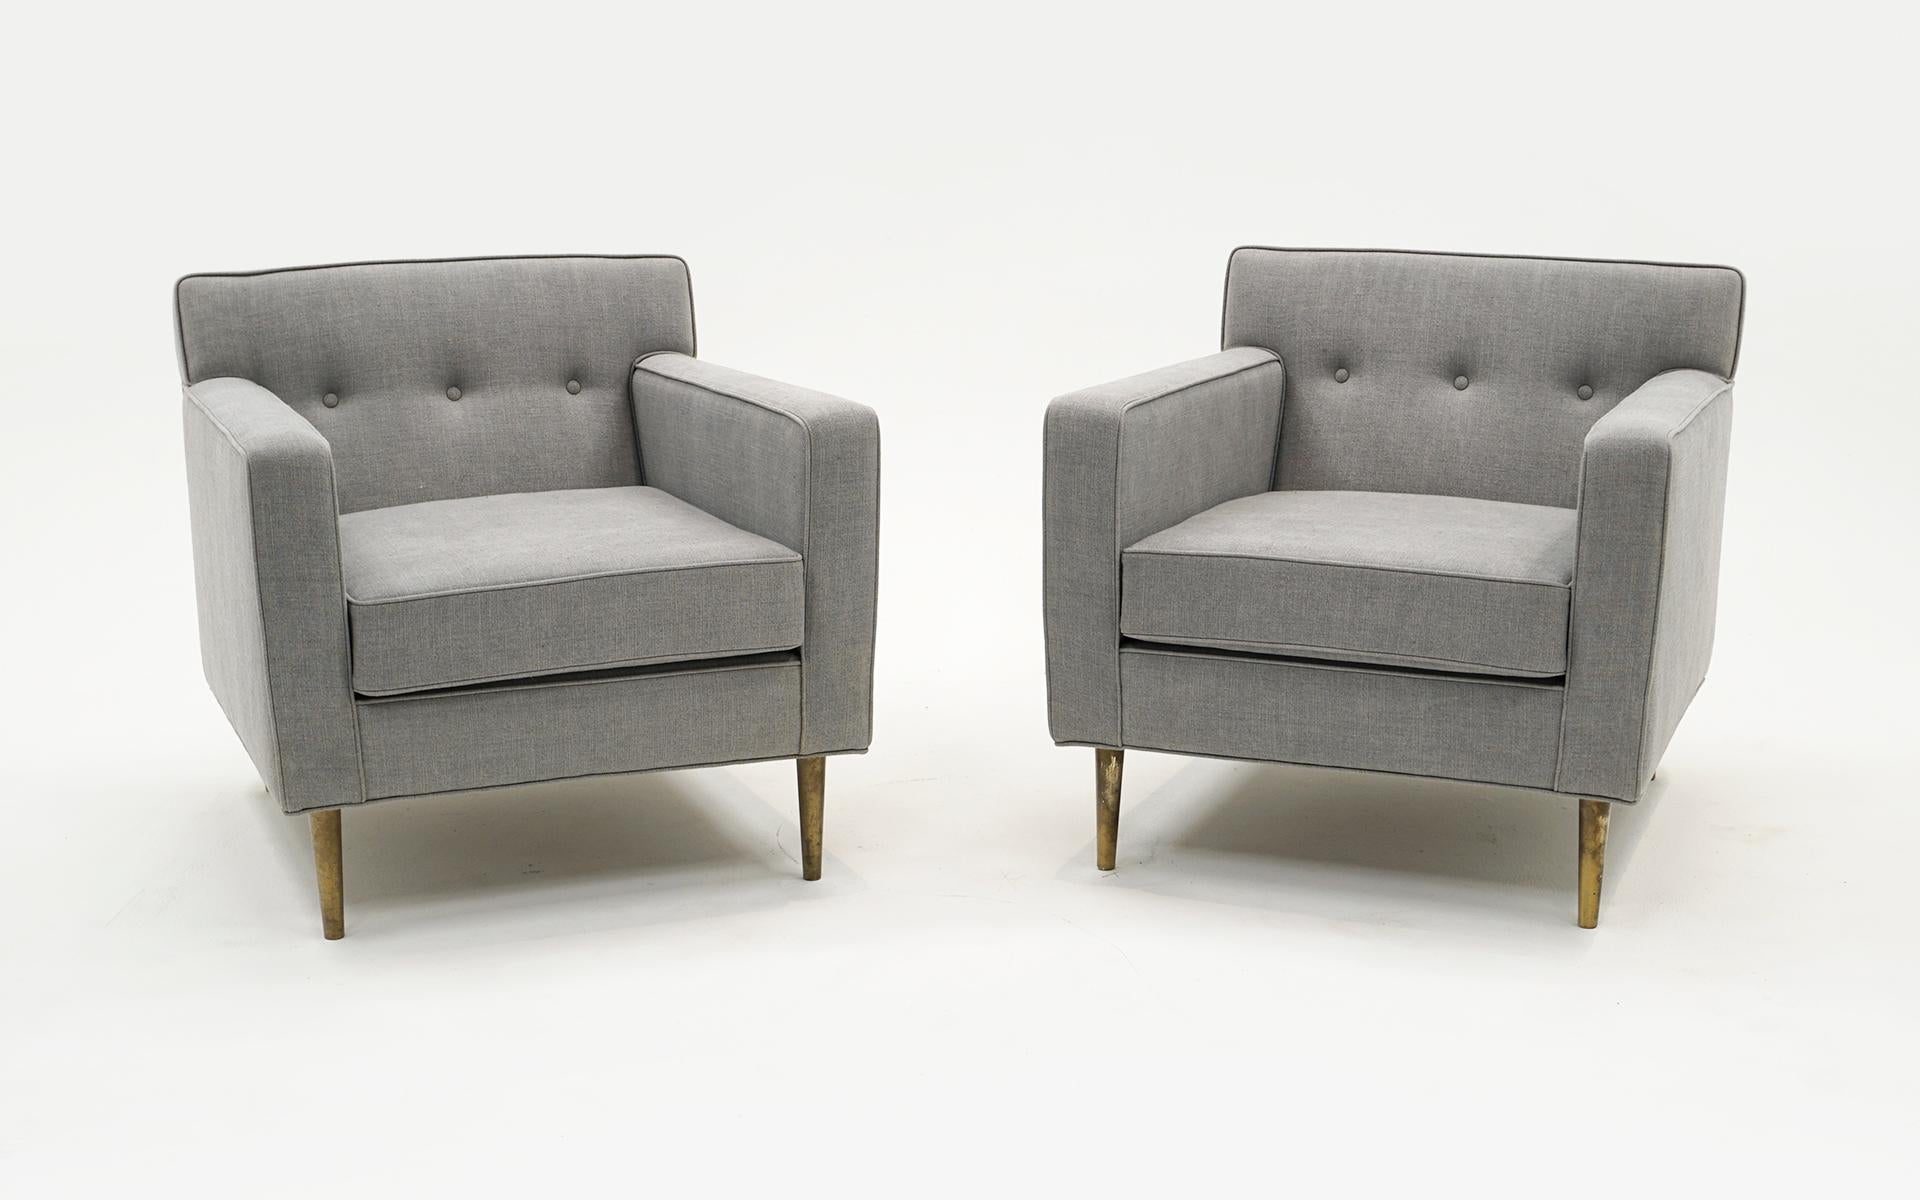 Beautiful pair of lounge chairs designed by Edward Wormley for Dunbar, 1948.  Expertly reupholstered in a light gray wool blend fabric.  The original legs are made of solid brass.  The upholstery is in excellent condition and the brass legs display